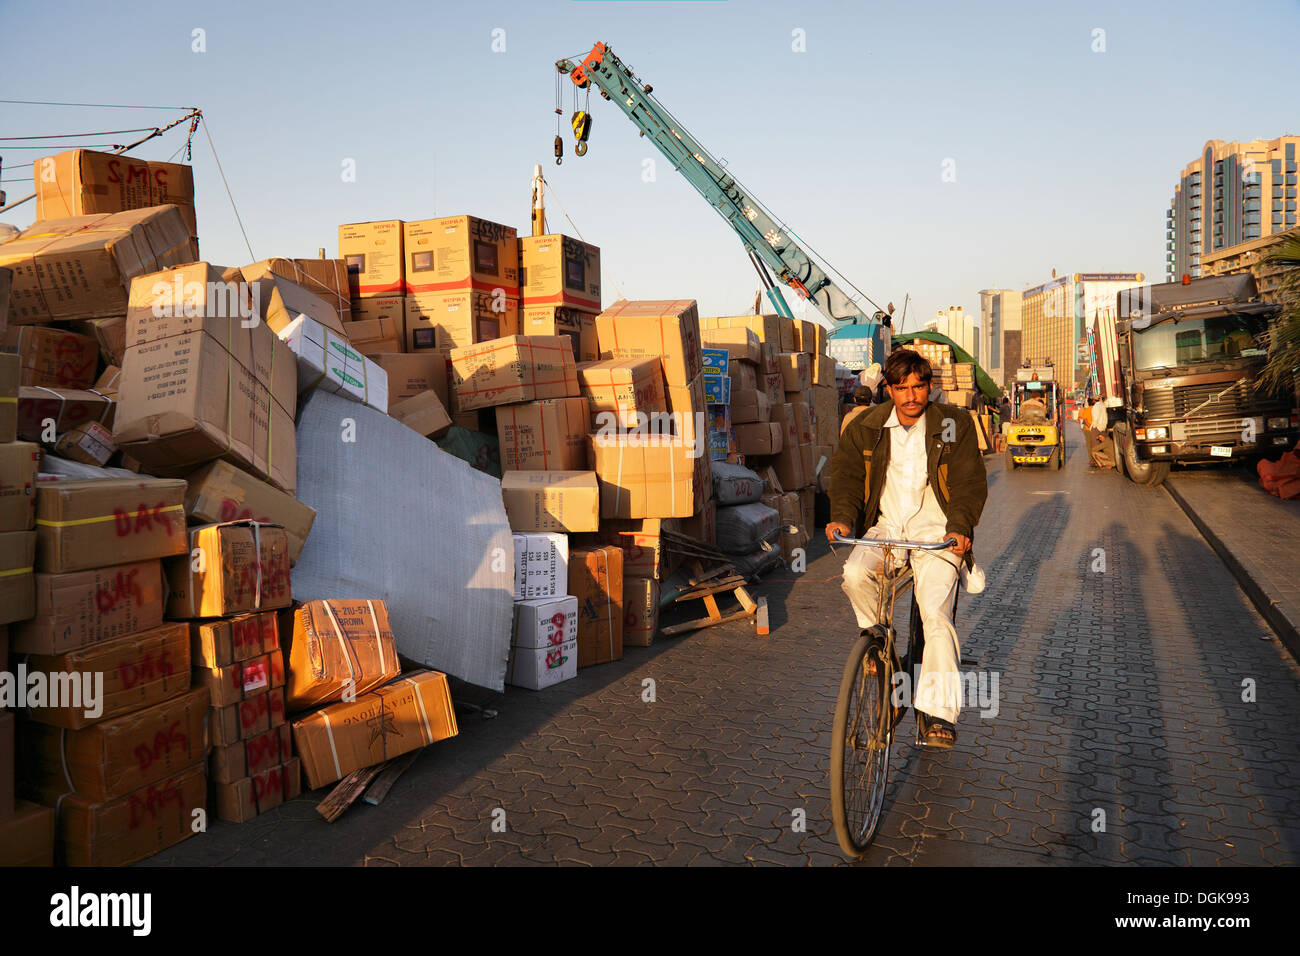 A dockside worker on his way home. Stock Photo